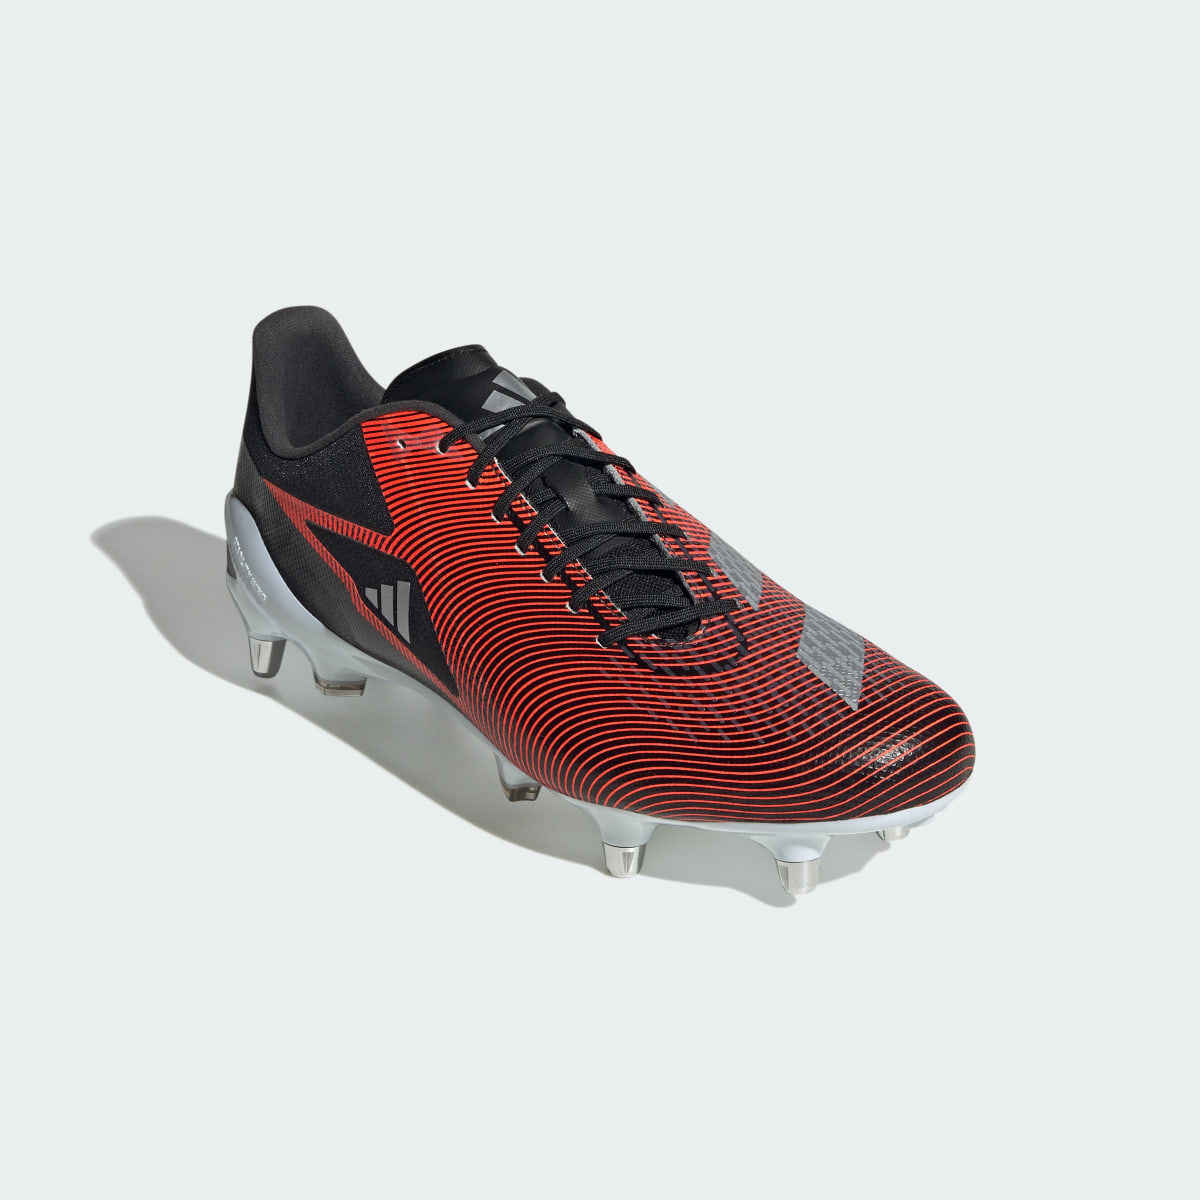 Adidas Adizero RS15 Pro Soft Ground Rugby Boots. 9